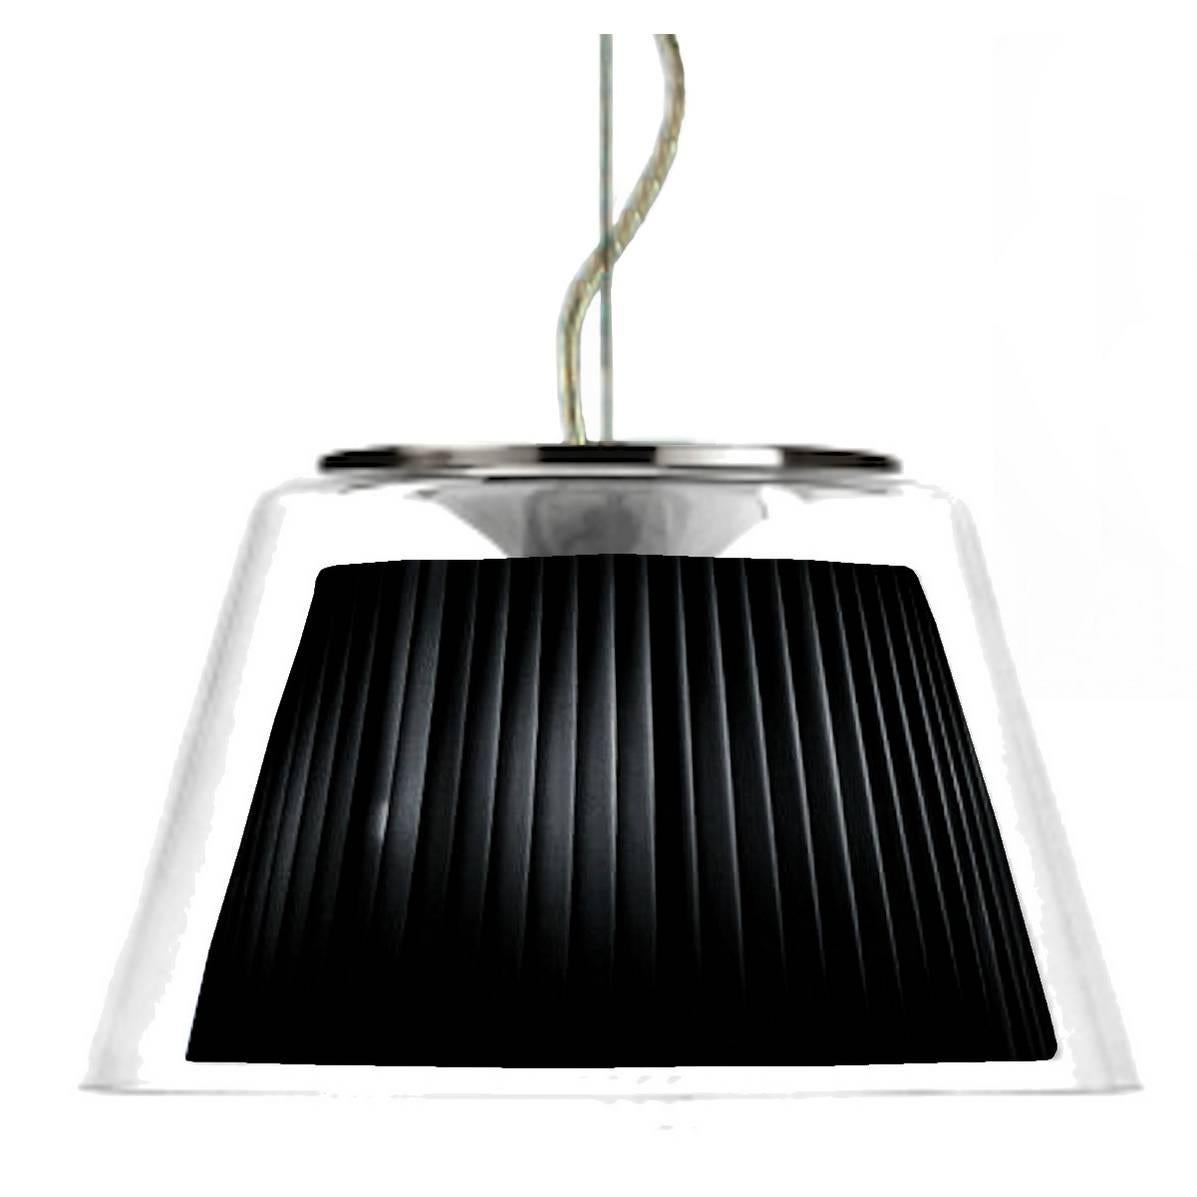 Gretta 1C30 '1S42' Pendant by Alfonso Fontal for Modiss For Sale